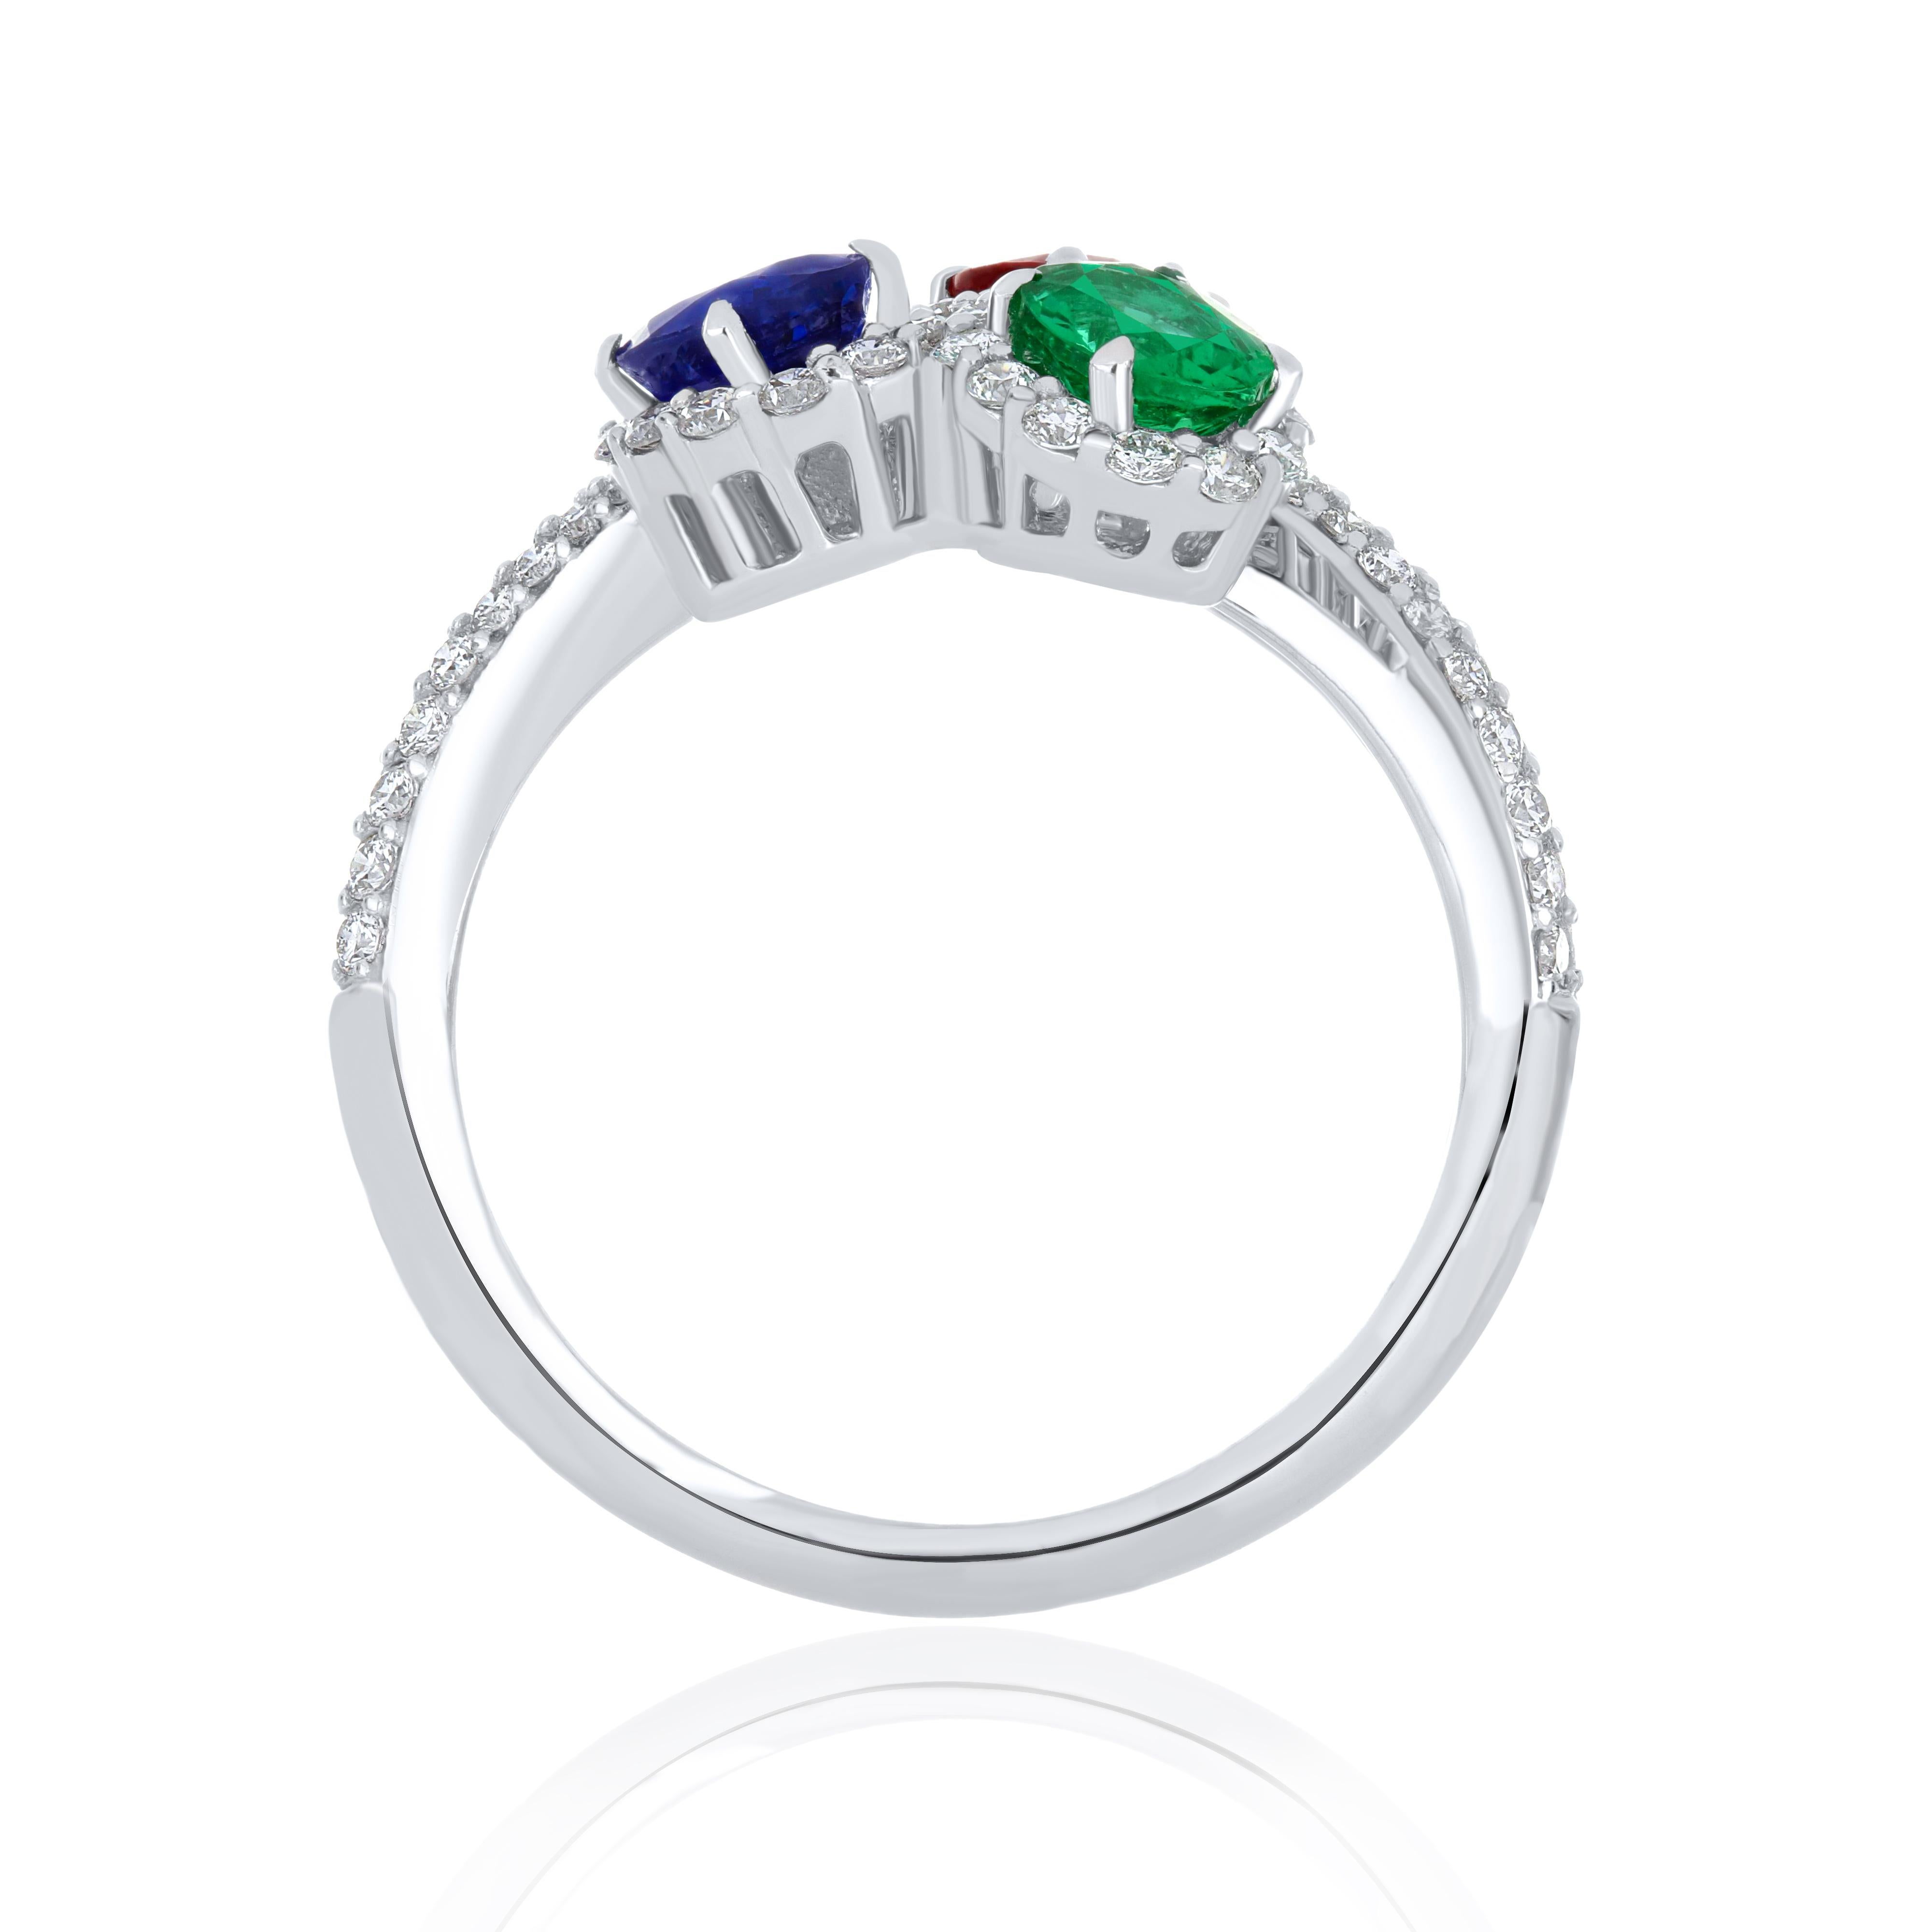 For Sale:  Ruby Mozambique, Emerald, Blue Sapphire and Diamond Ring 18 Karat White Gold  5